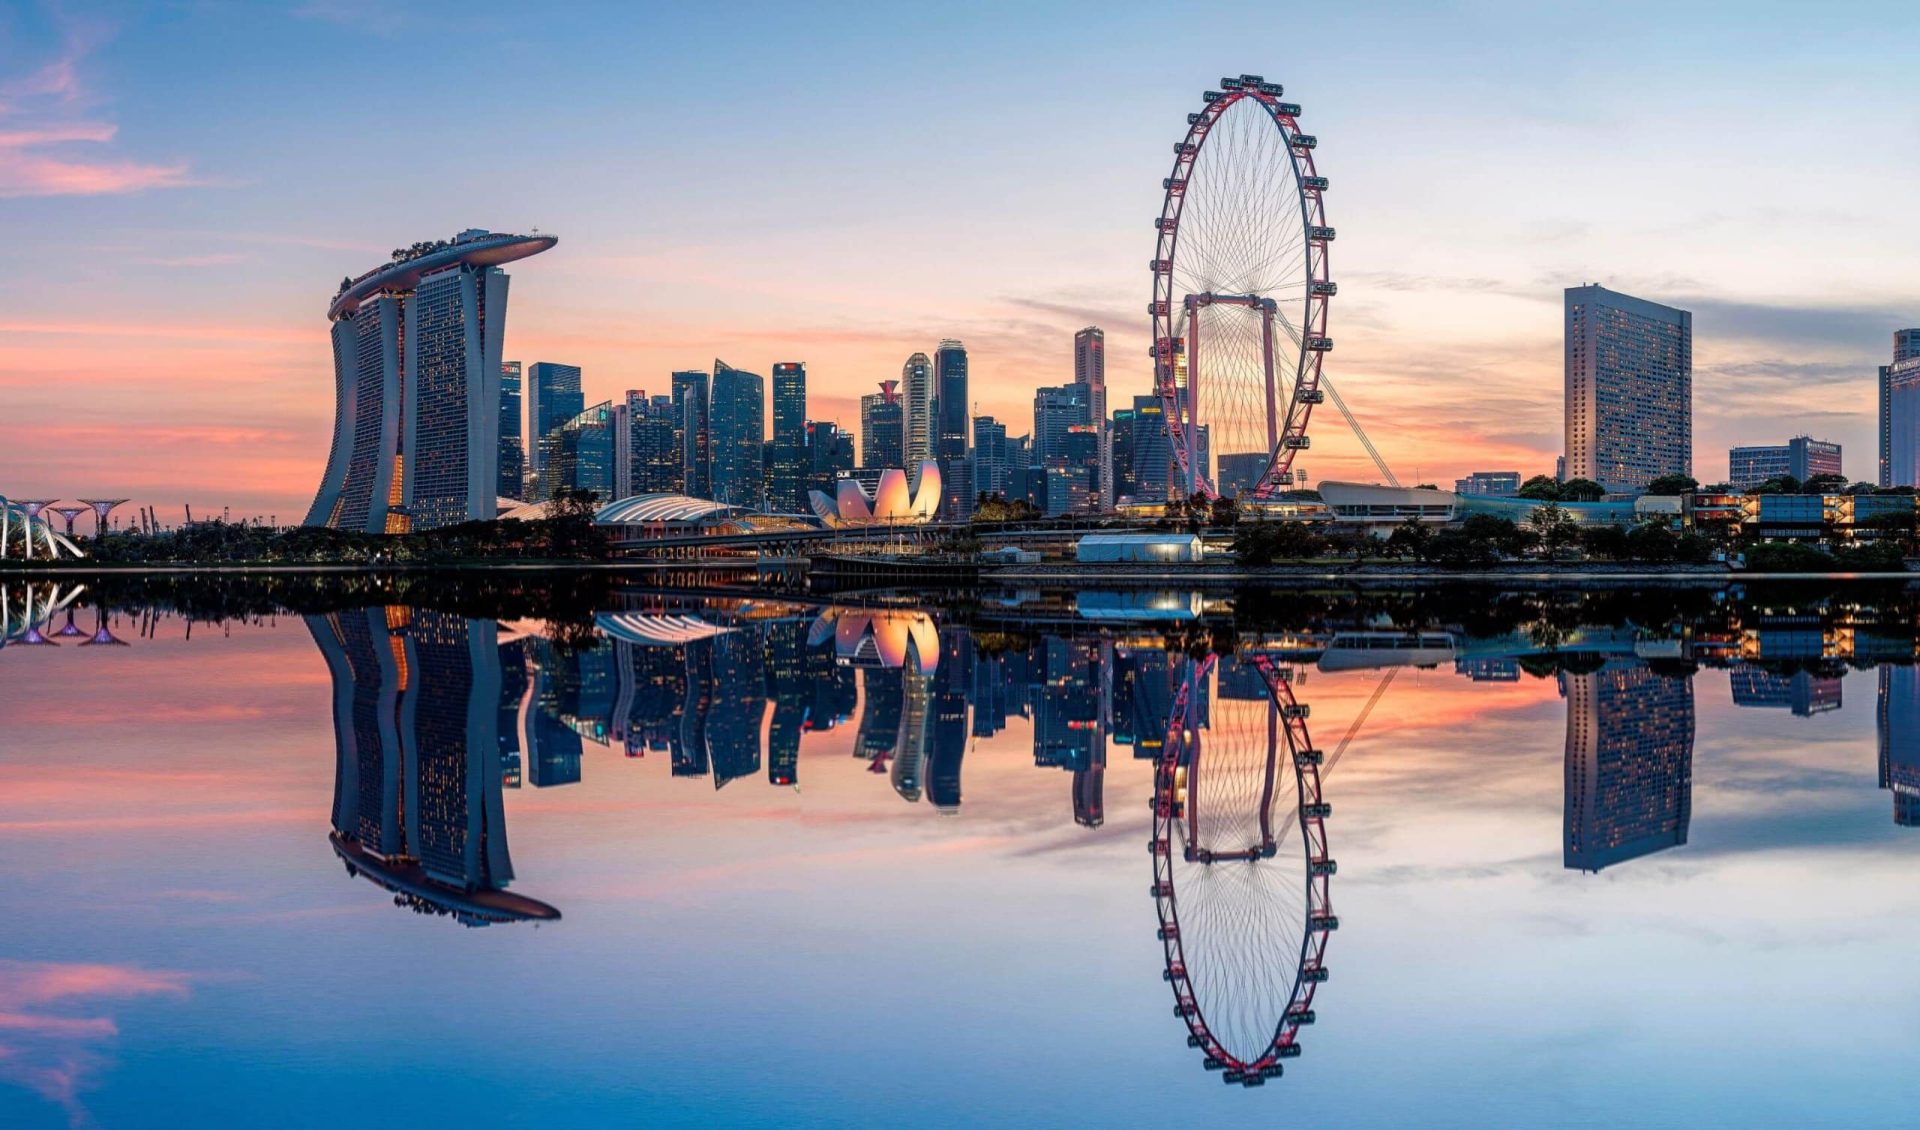 Singapore to steer clear of further crypto gambling regulation